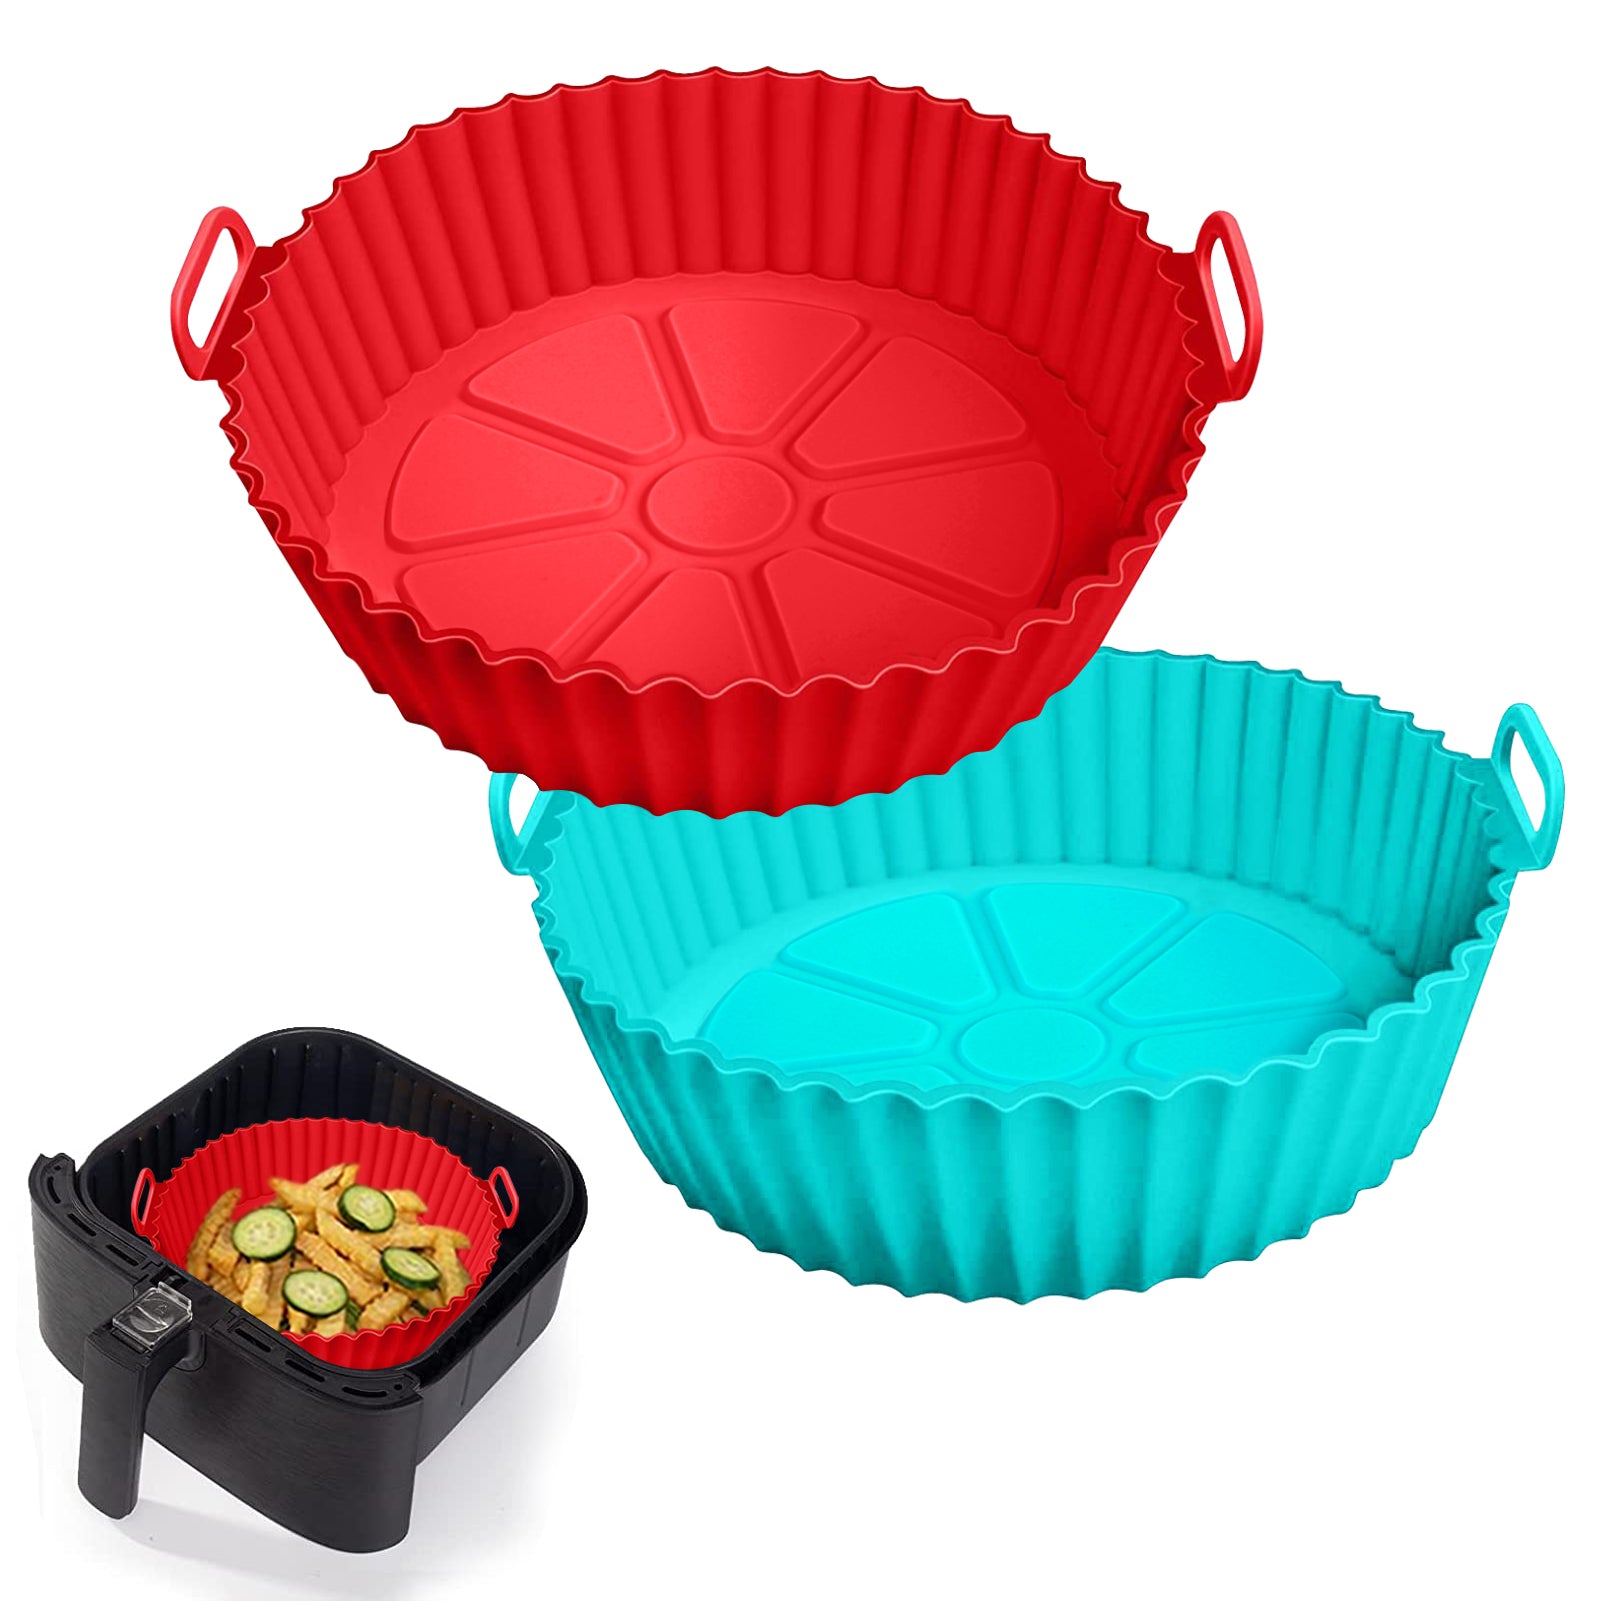 PLTHYMT 2pcs Silicone Air Fryer Liners 6.5 inch, Reusable Air Fryer Basket Accessories Round, Food Grade Silicone for Air Fryer 2 to 5 AFSS2-RB